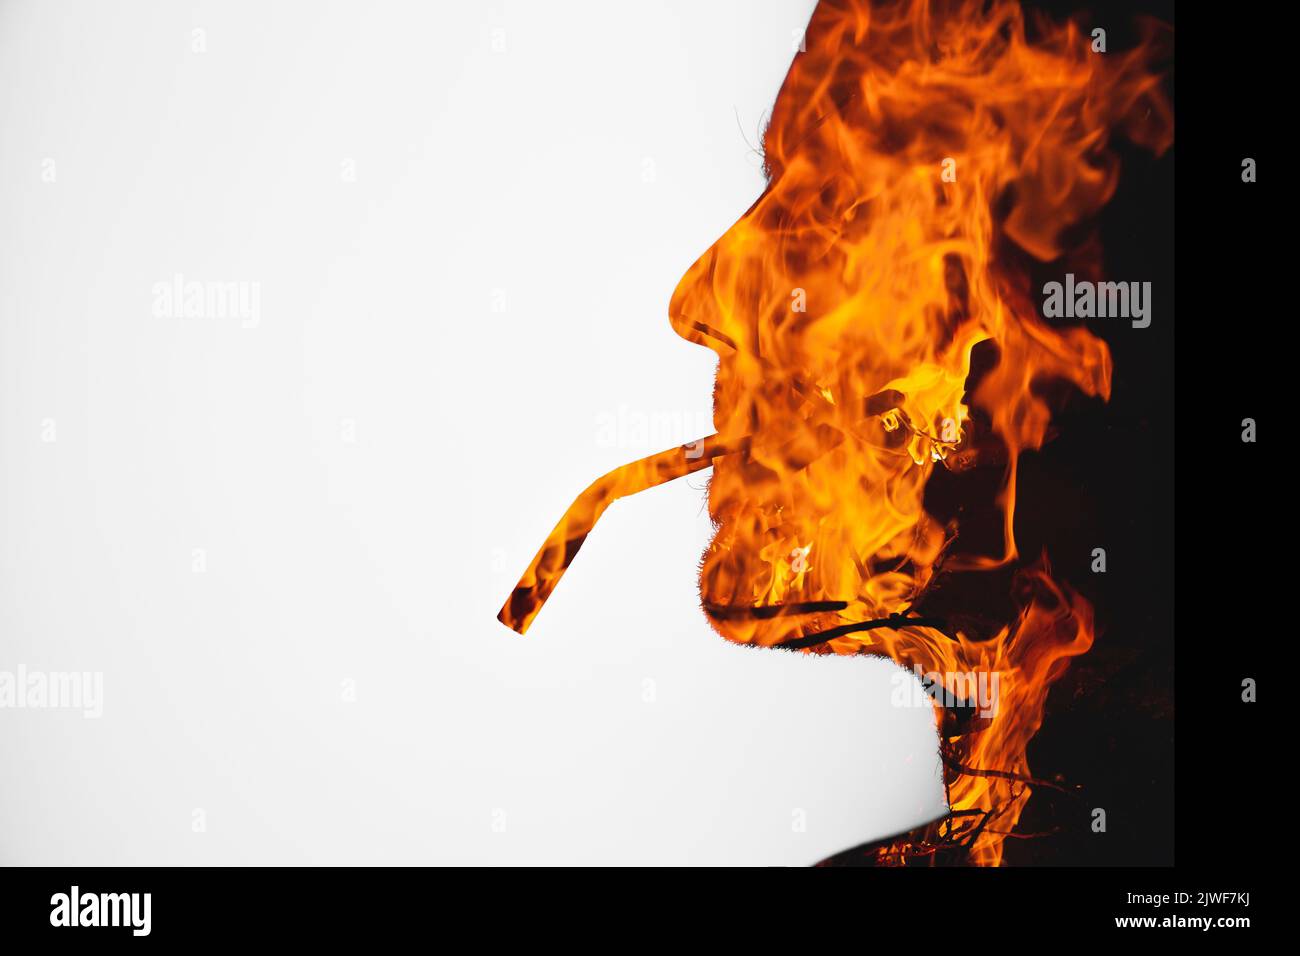 A Silhouette of a person on fire with double exposure effect while smoking  isolated on white background Stock Photo - Alamy